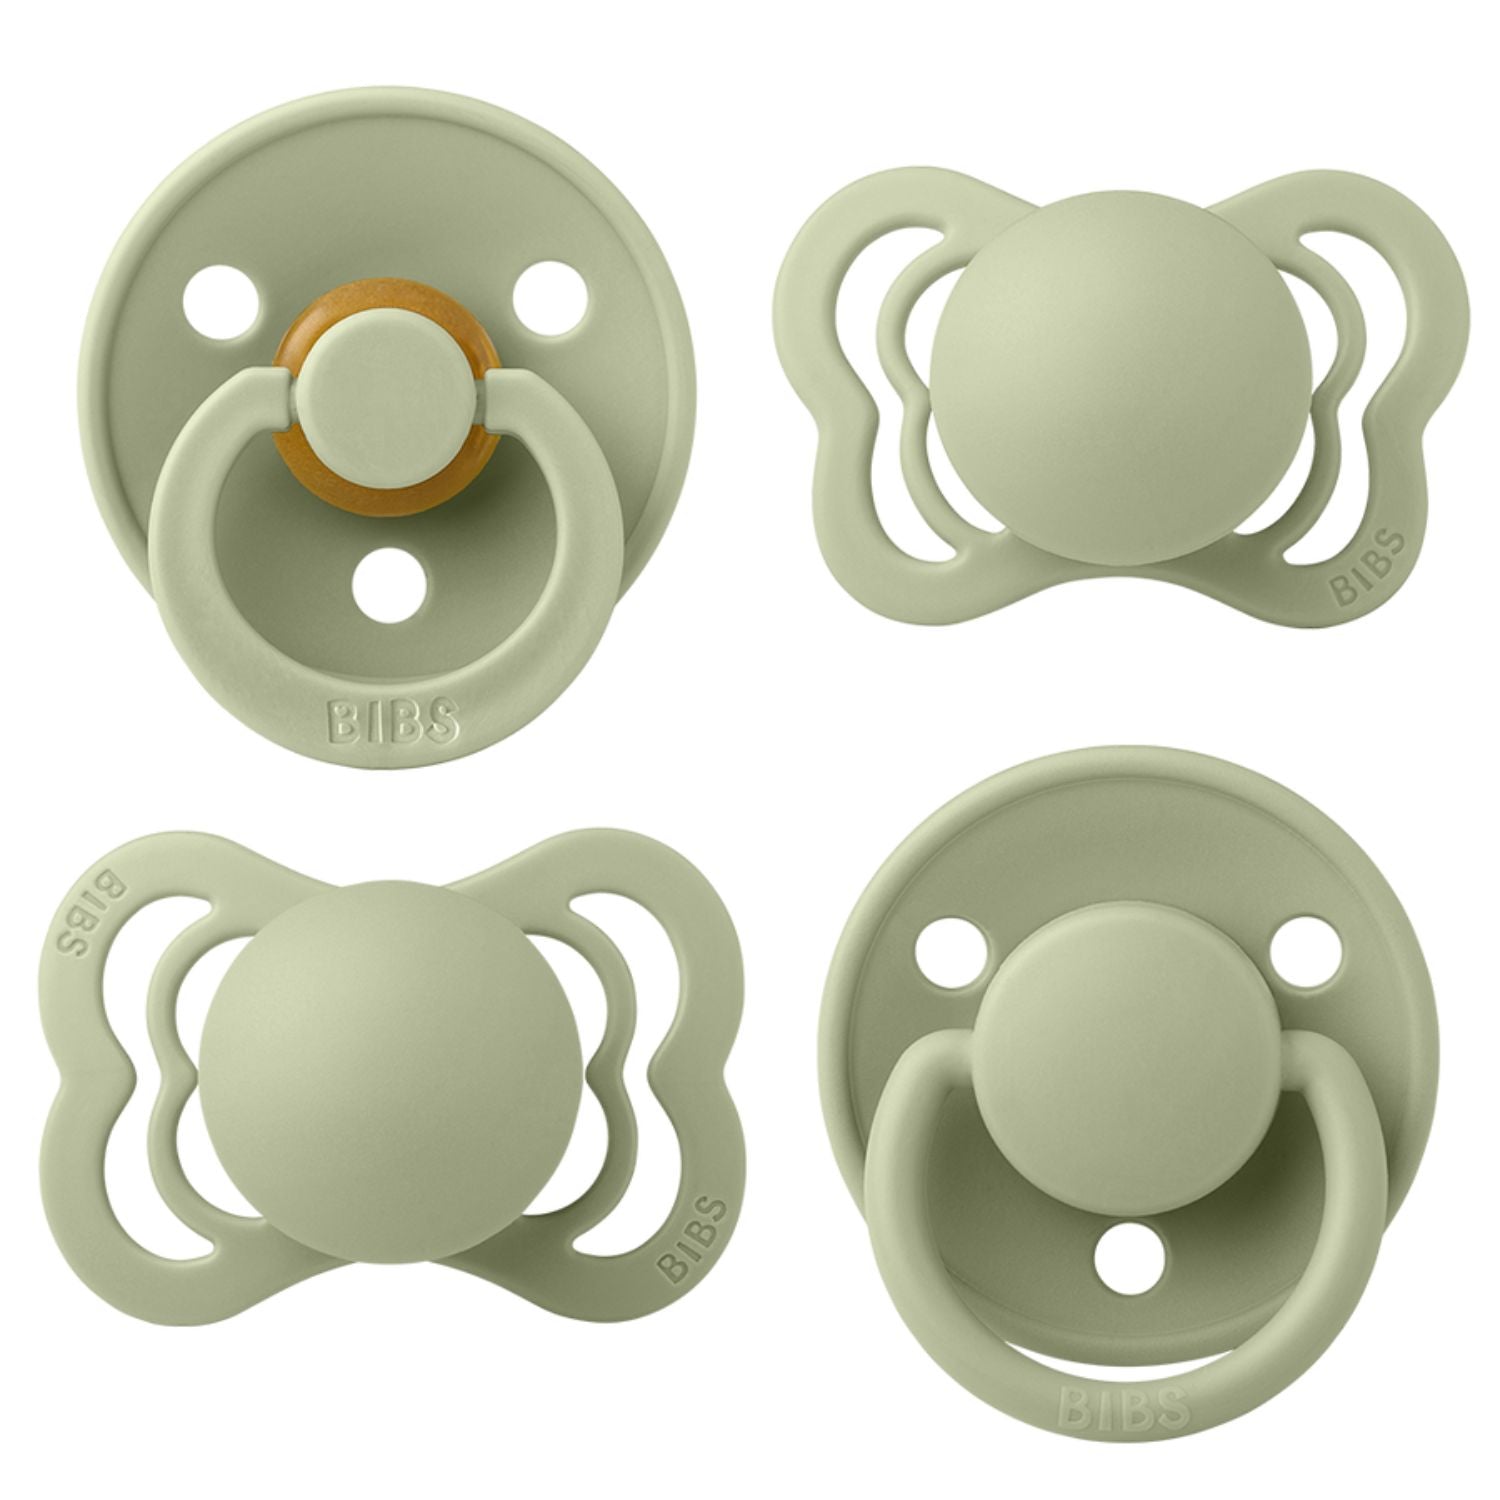 Try-It Collection Pacifier Set